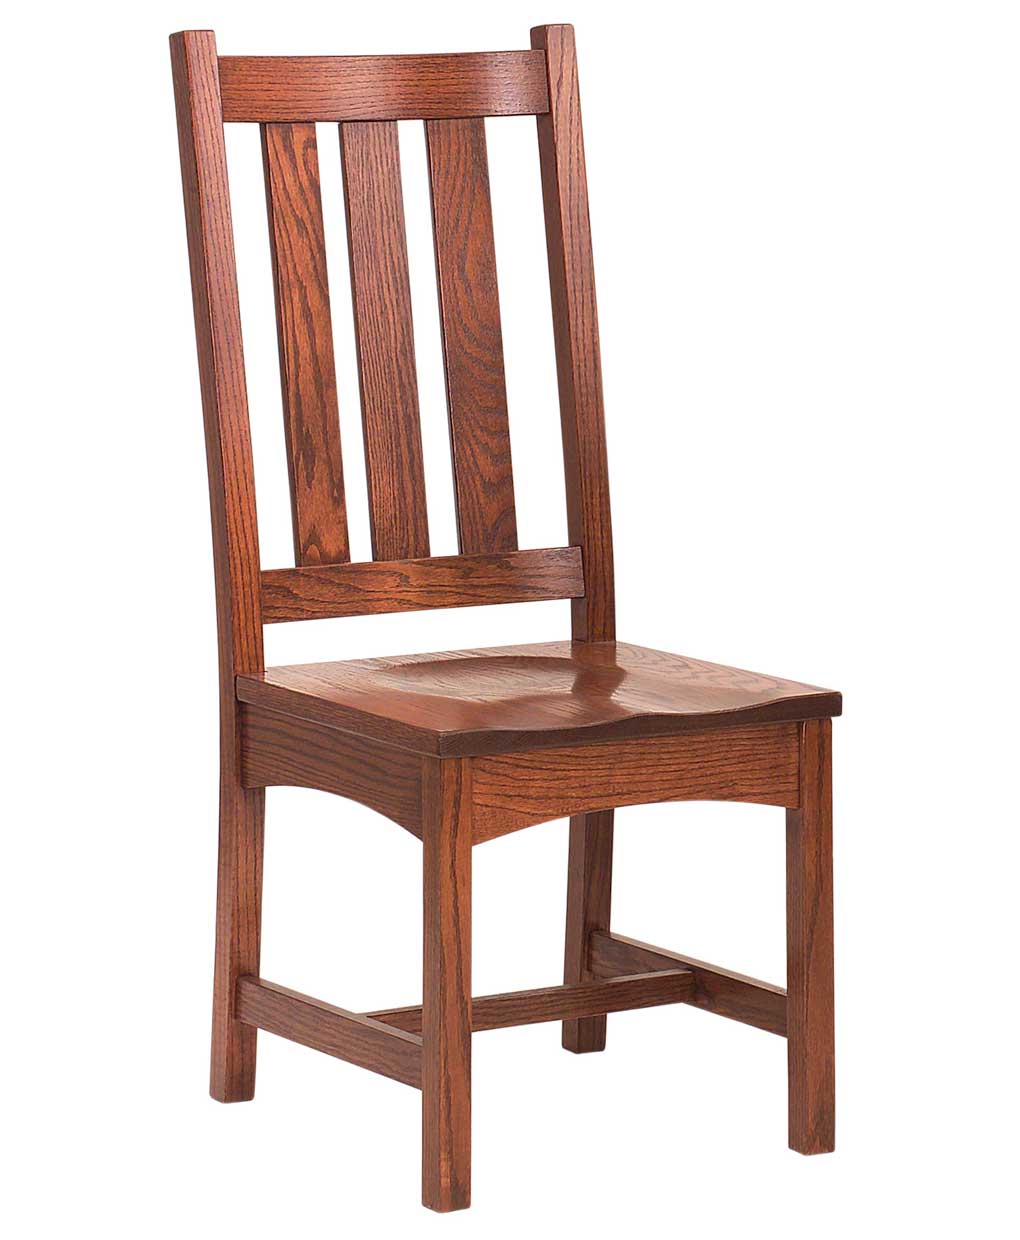 Vintage Mission Dining Chair - Amish Direct Furniture